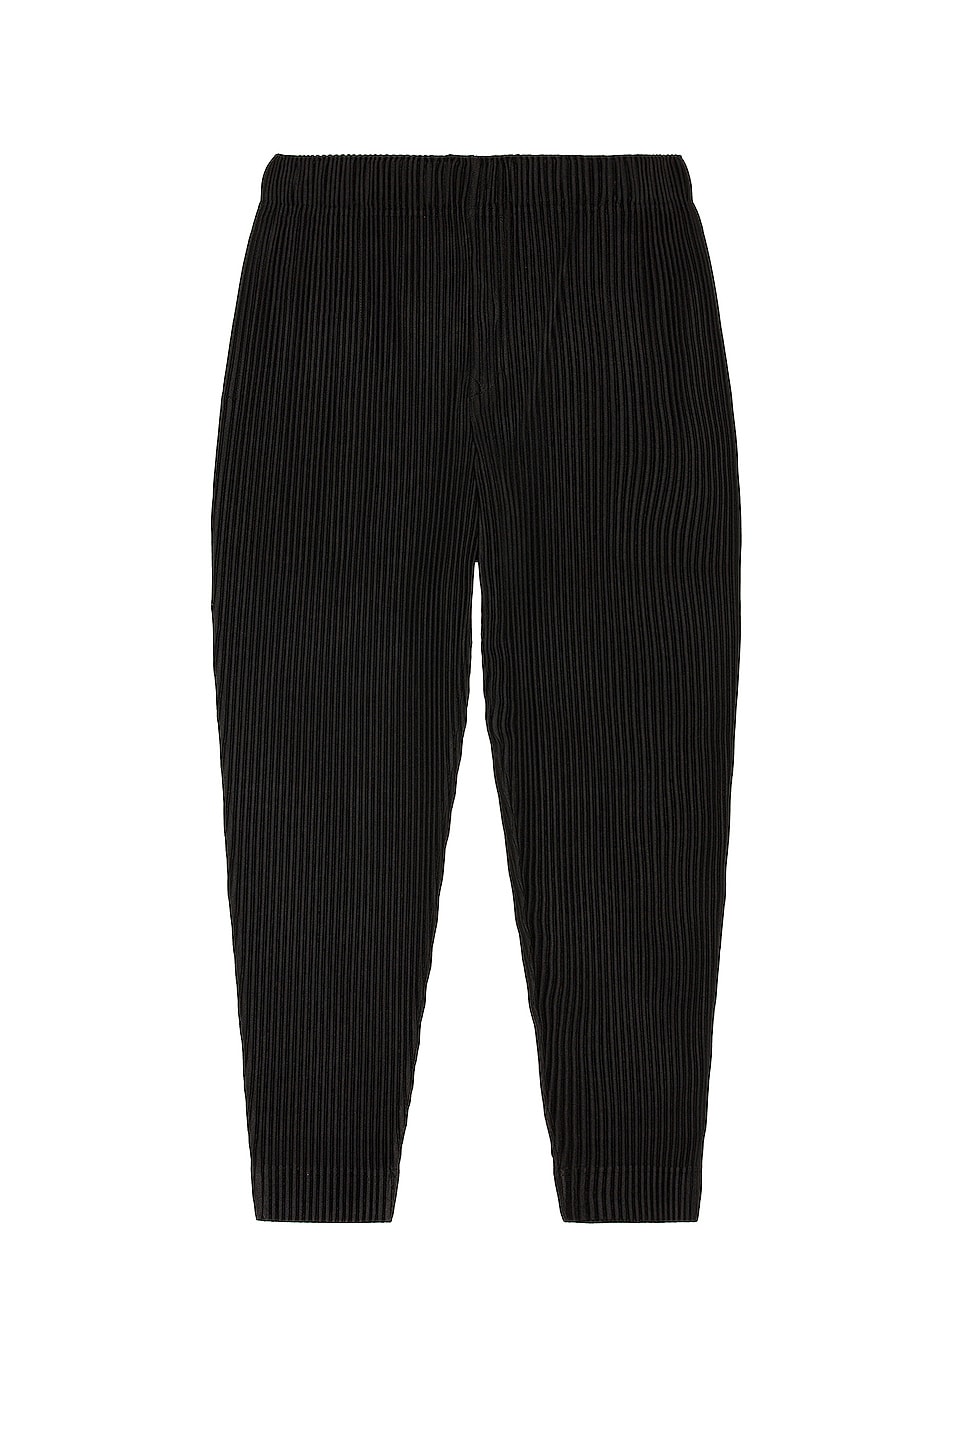 Image 1 of Homme Plisse Issey Miyake Pleats Bottoms 3 Pant in Black